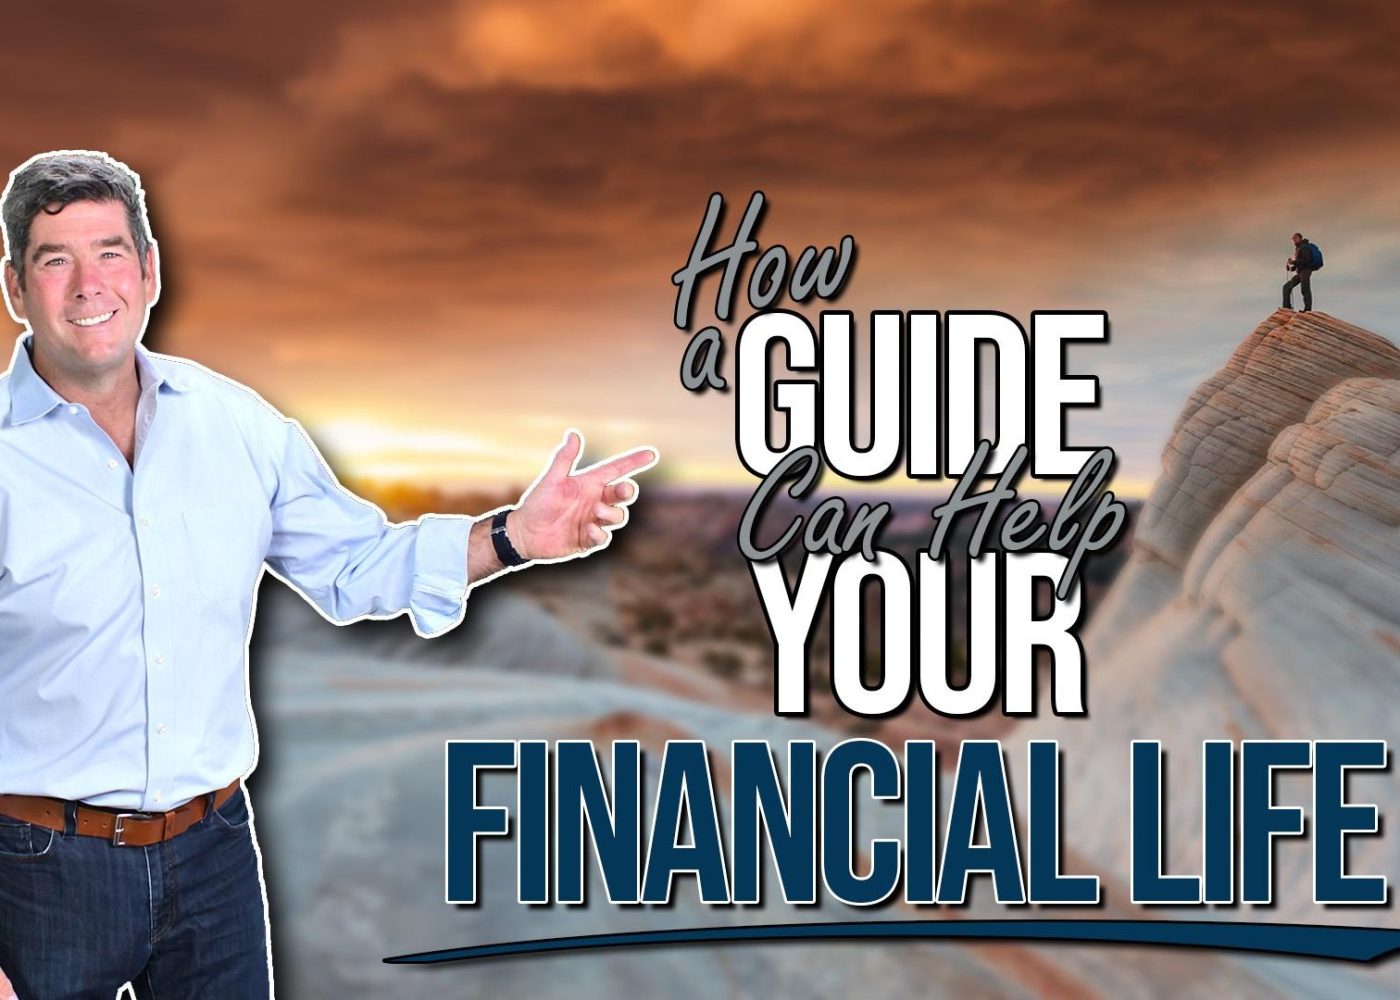 Video: How a Guide Can Help Your Financial Life